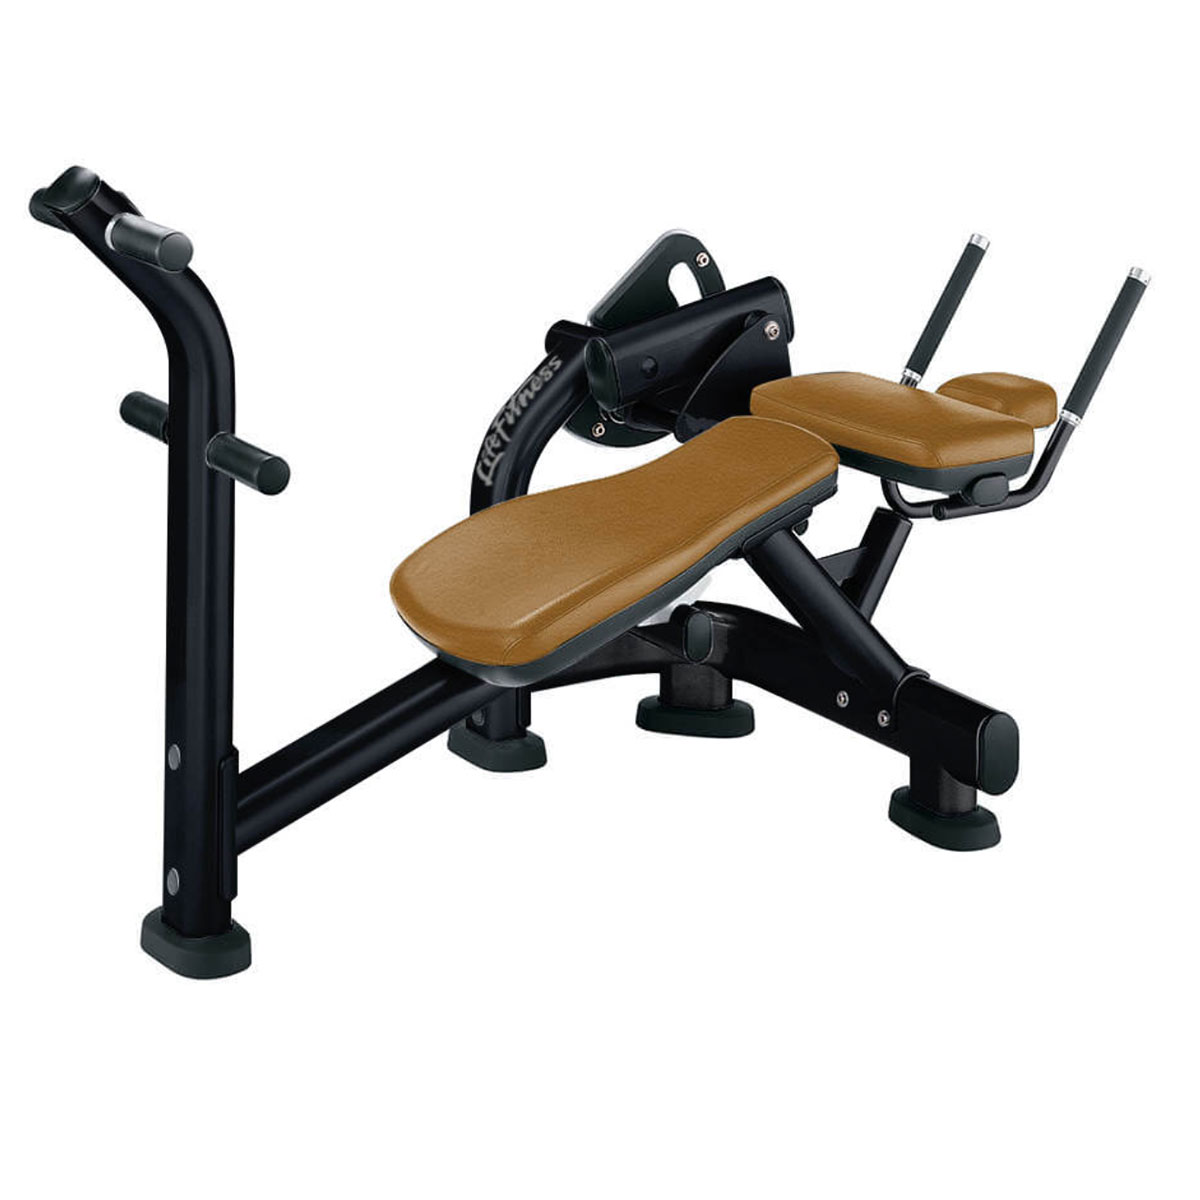 Life Fitness Signature Series Ab Crunch Bench | Used Gym ...